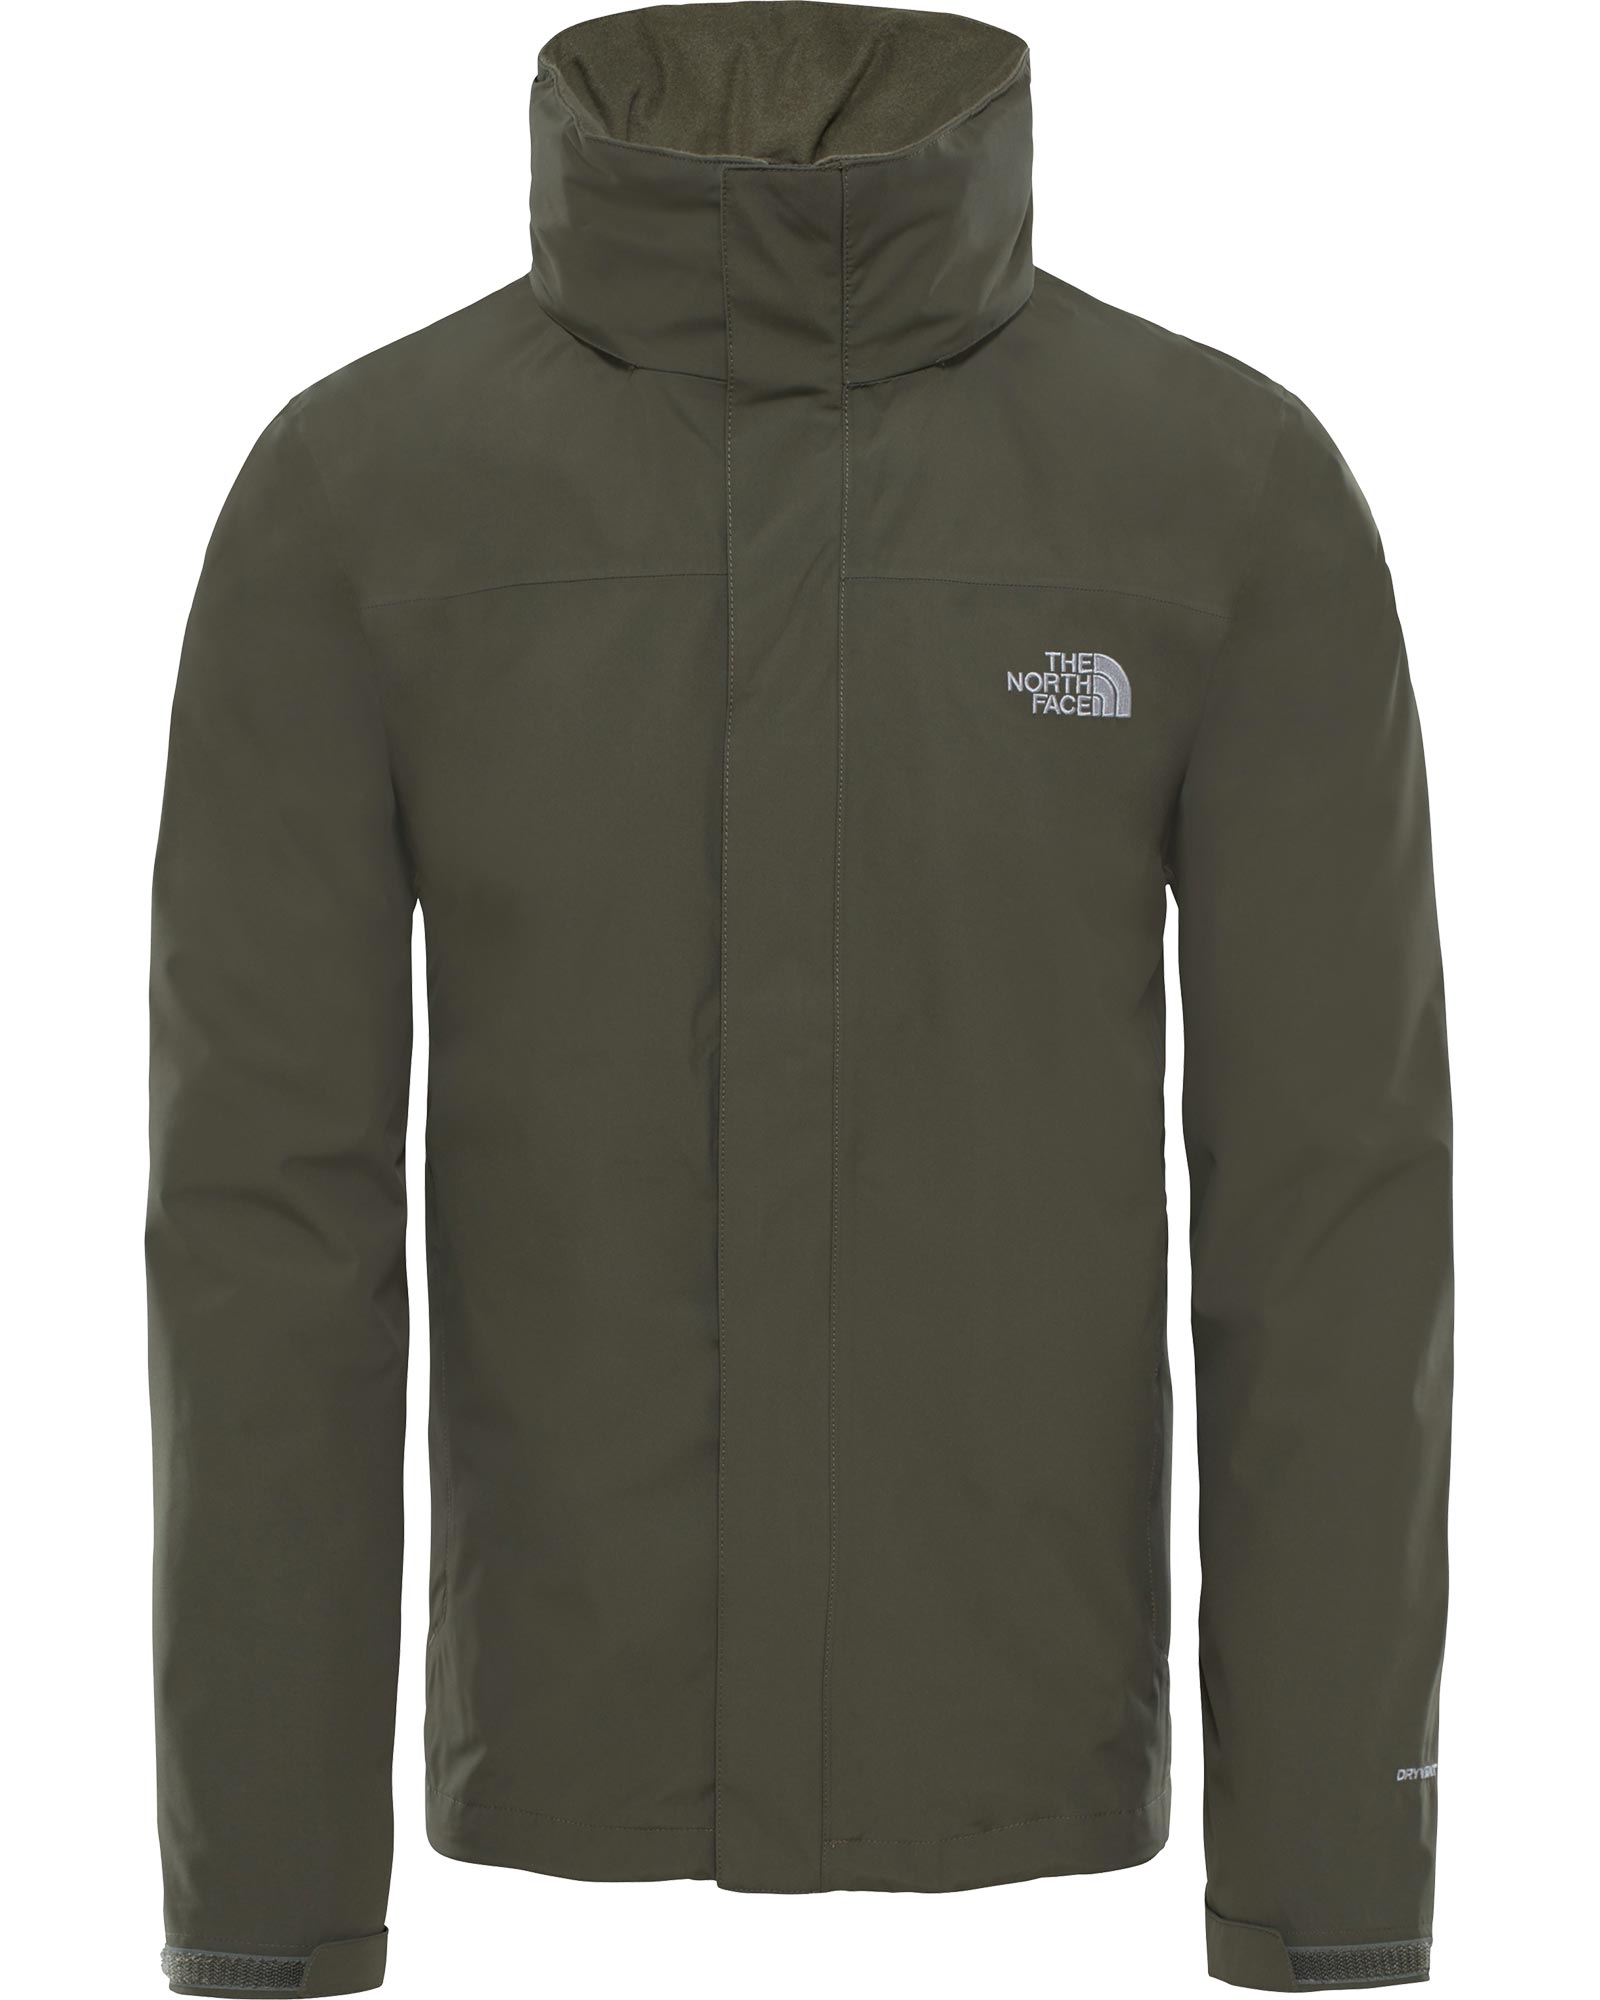 The North Face Sangro DryVent Men's Jacket 0